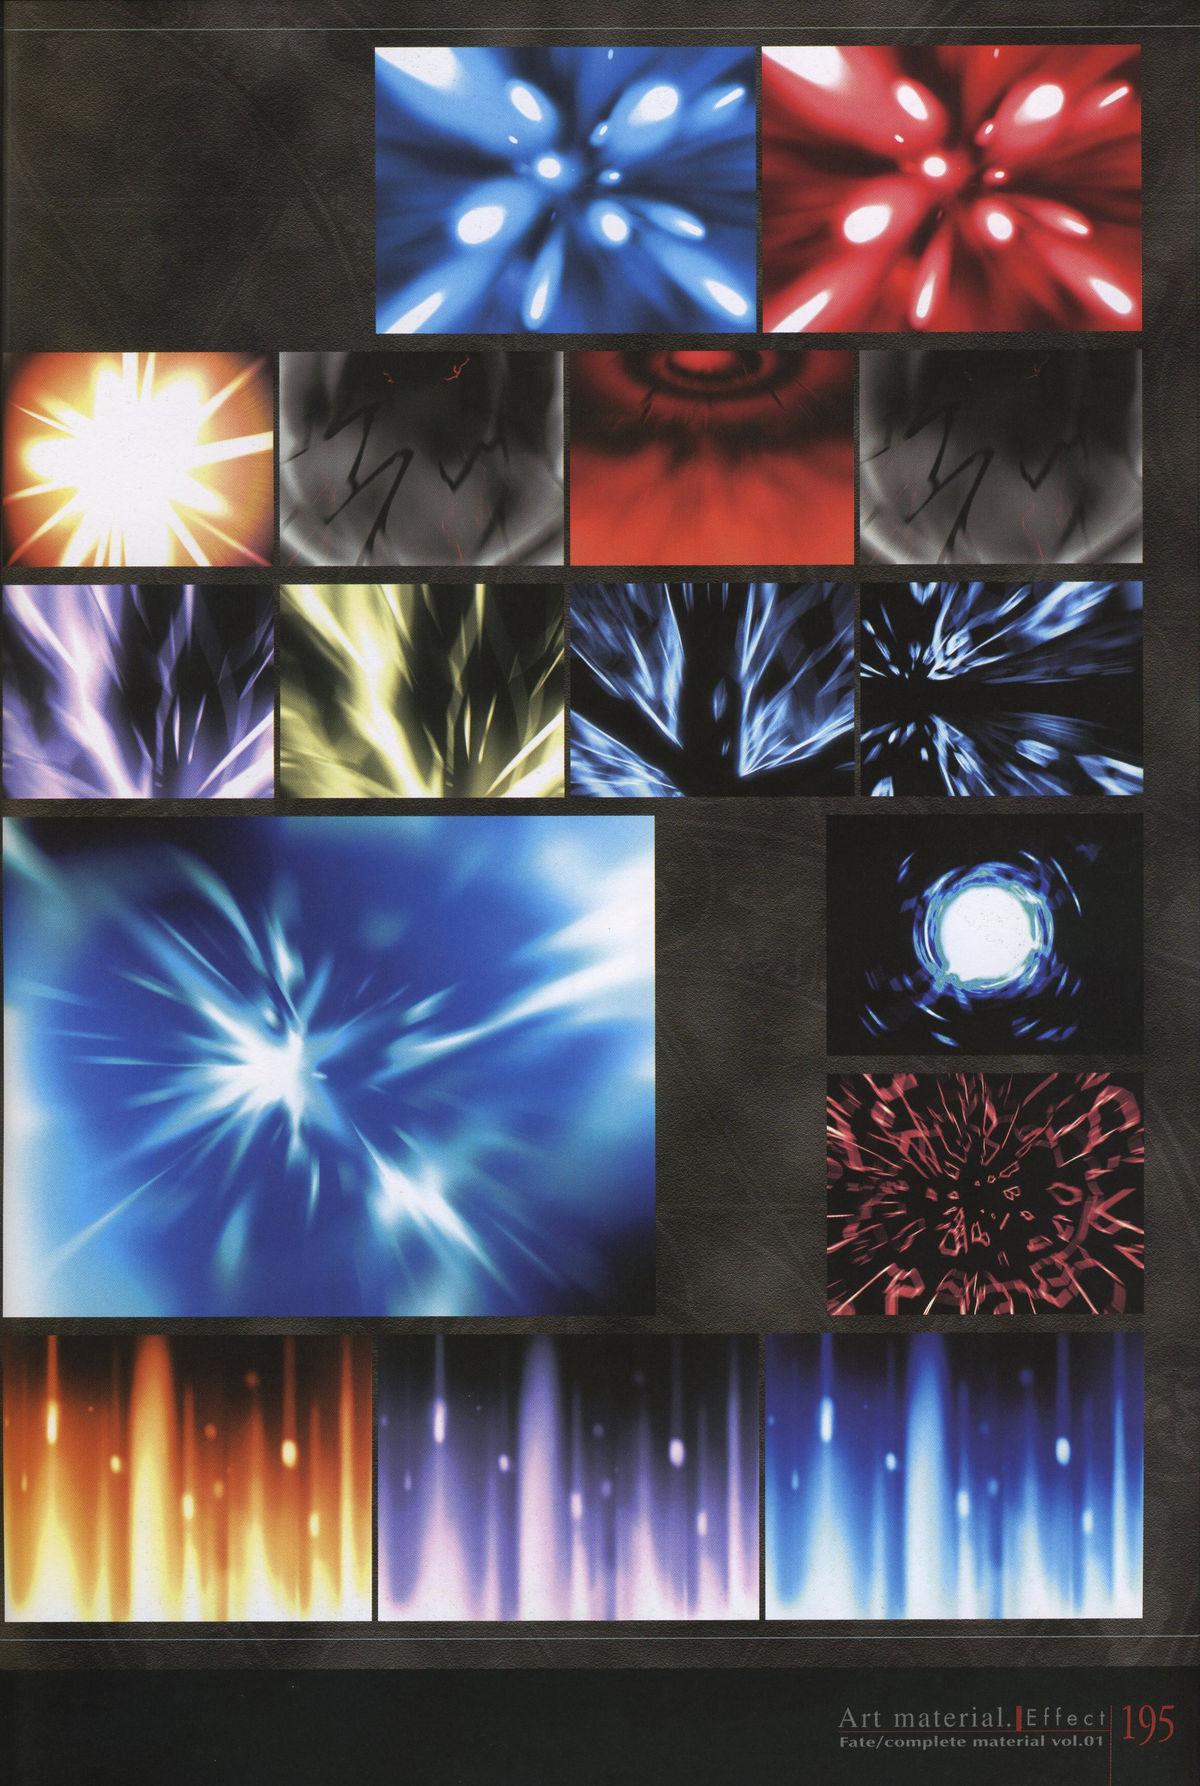 Fate/complete material I - Art material. 199